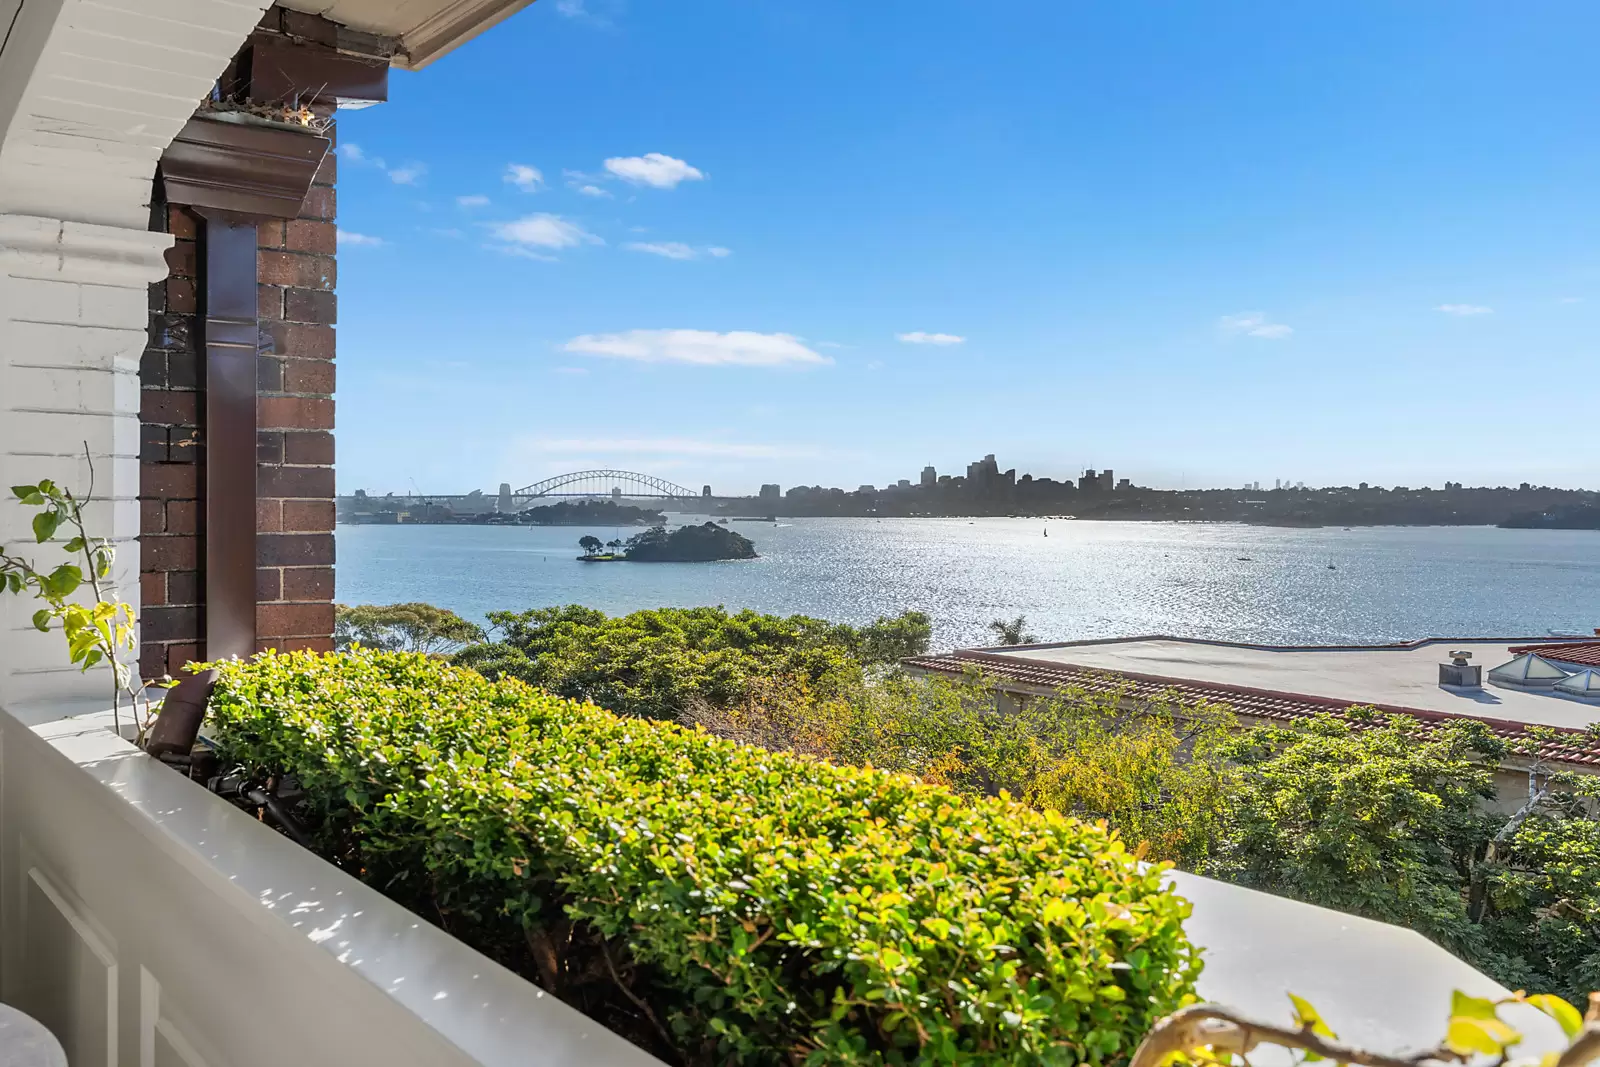 Photo #1: 8/59 Wolseley Road, Point Piper - Sold by Sydney Sotheby's International Realty